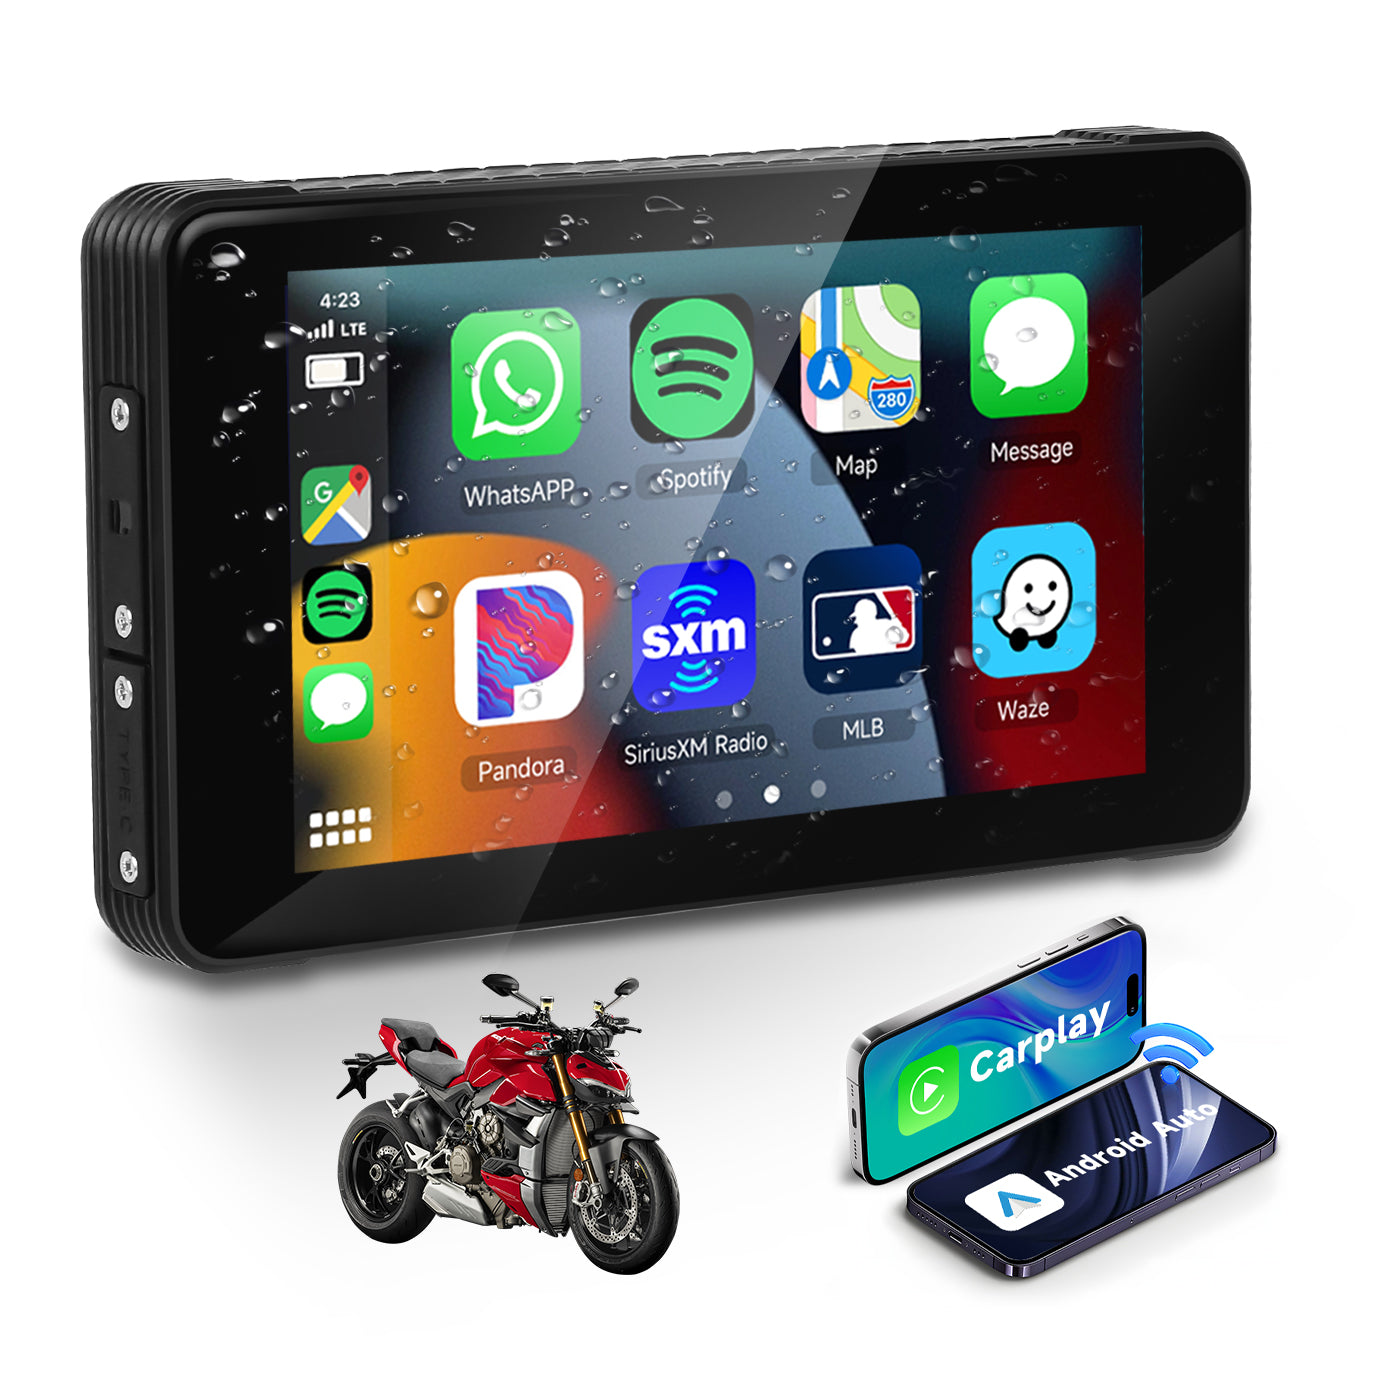 Zmecar 5inch Motorcycle GPS Wireless Carplay Android Auto Screen IP65 Waterproof screen, Dual Bluetooth Connectivity, TF/Type-C for Software Upgrade